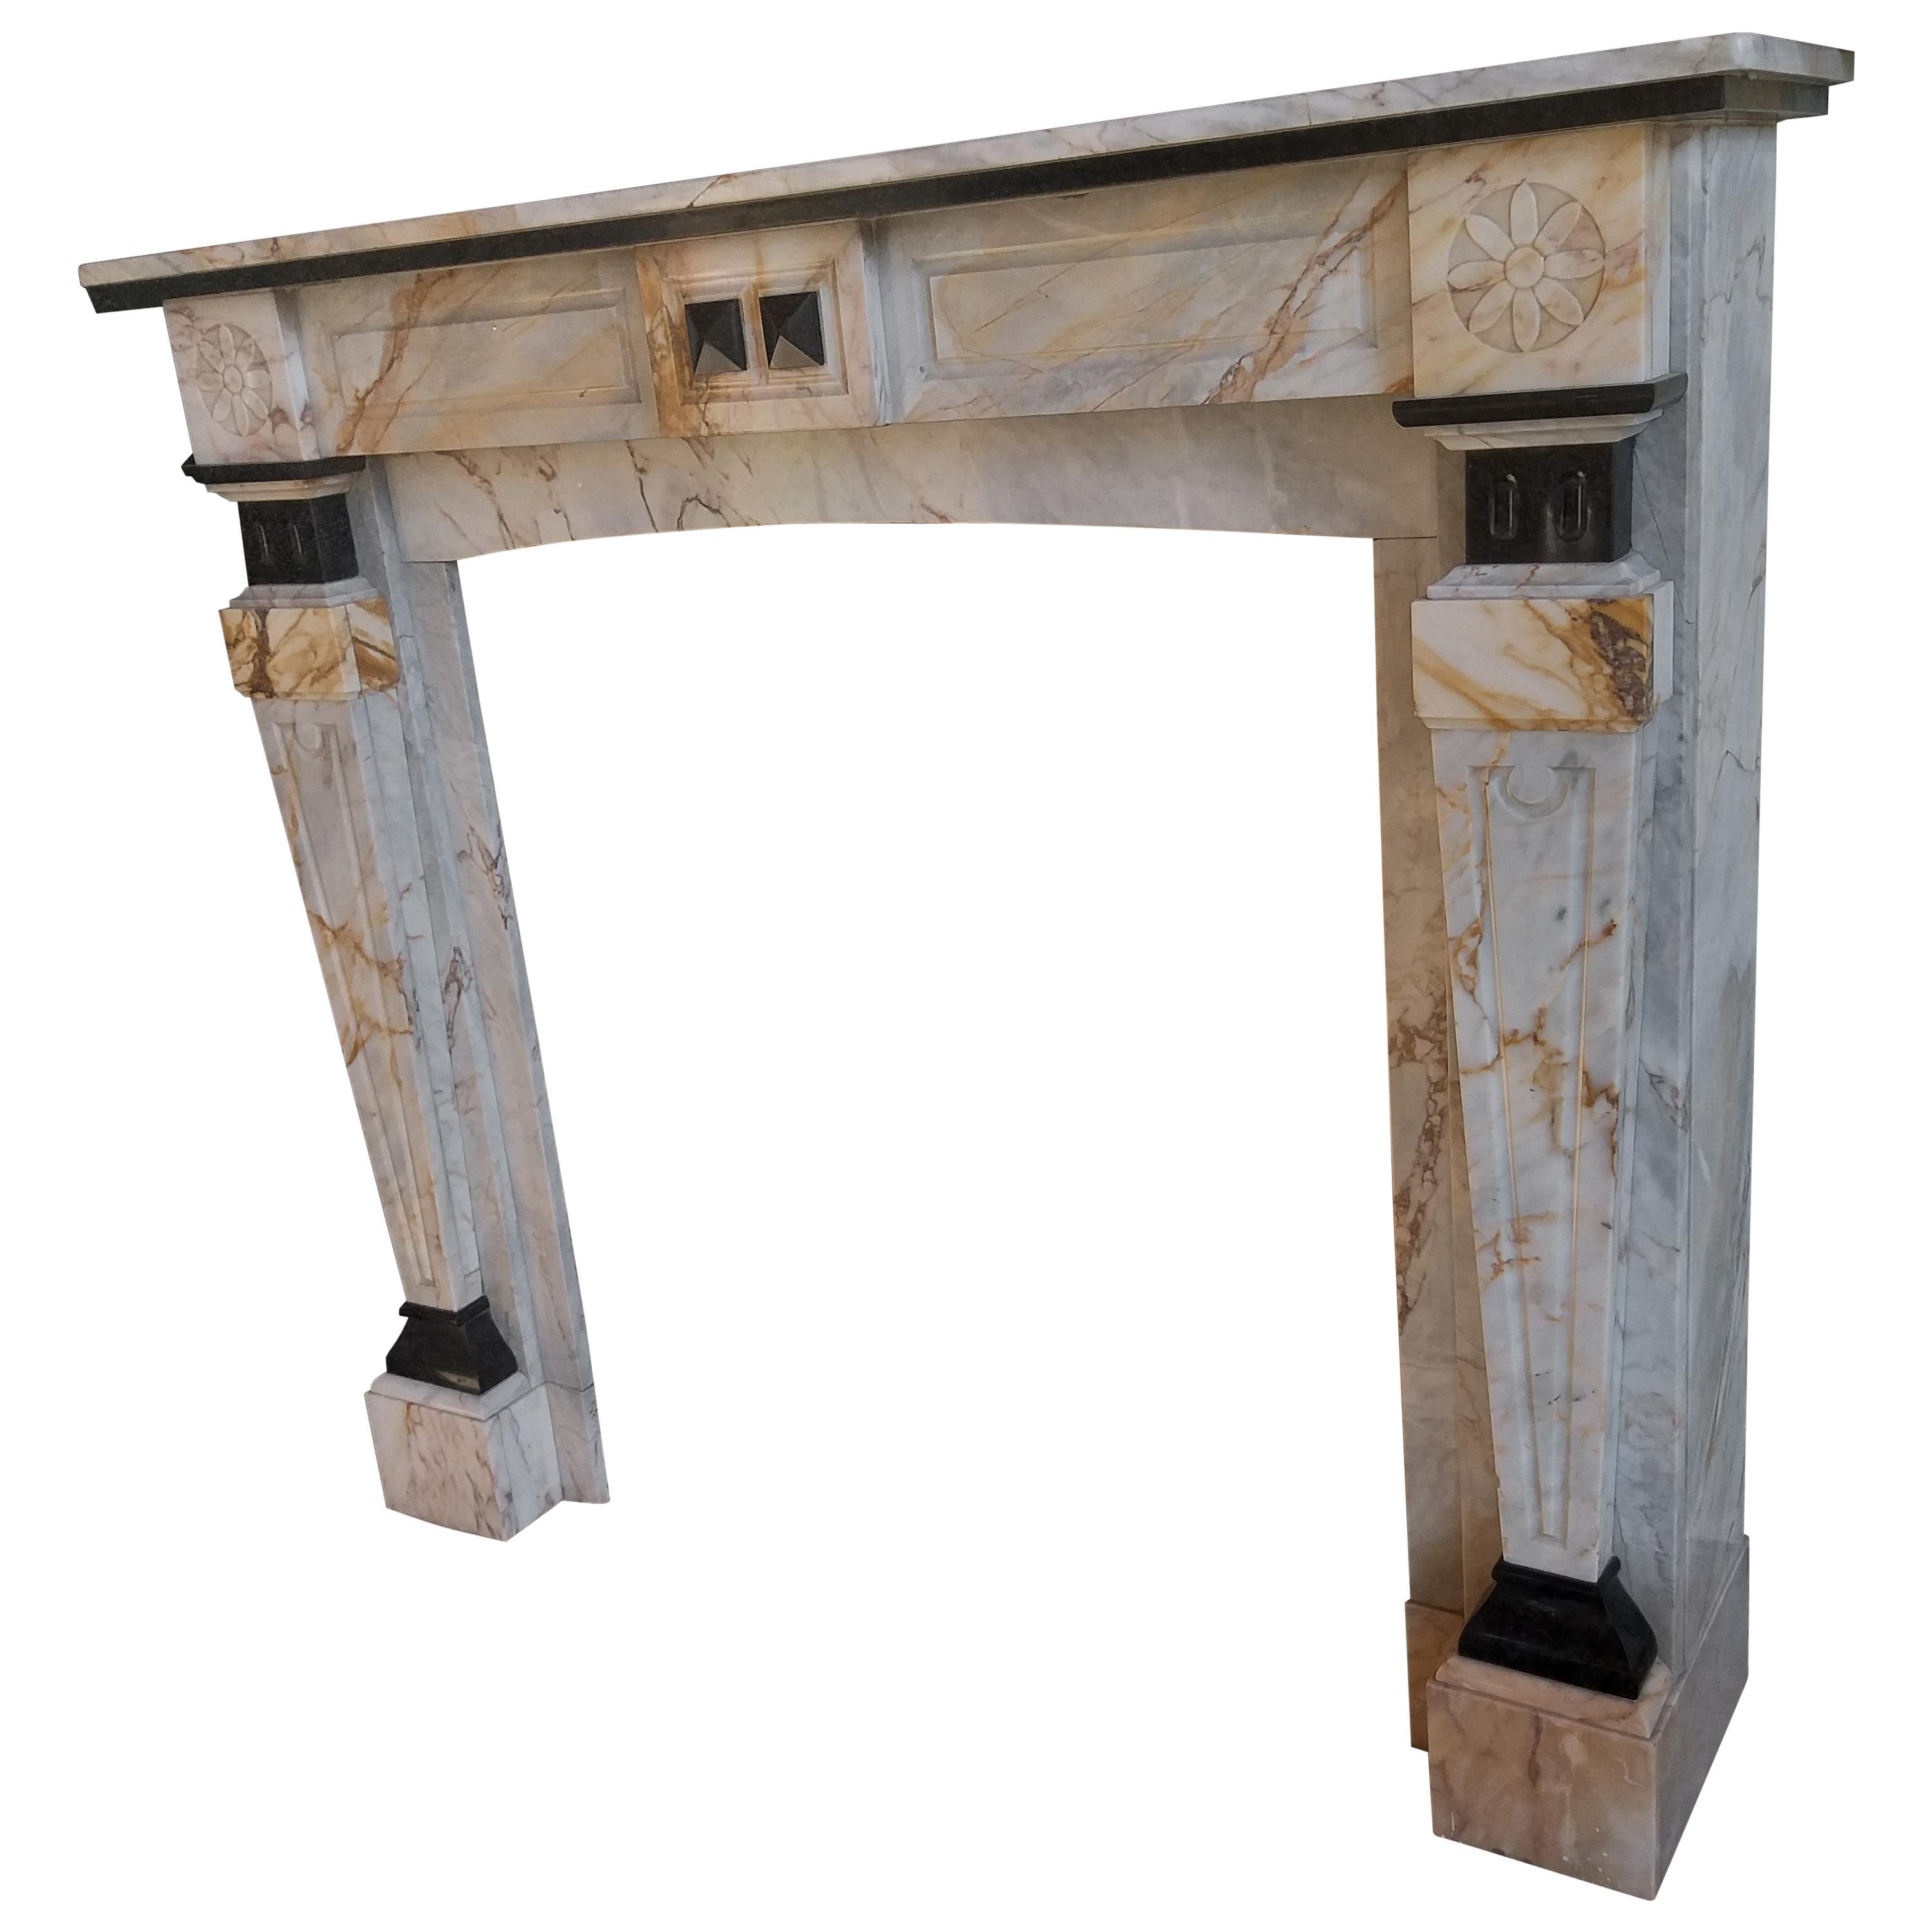 ART DECO Marble Fireplace For Sale